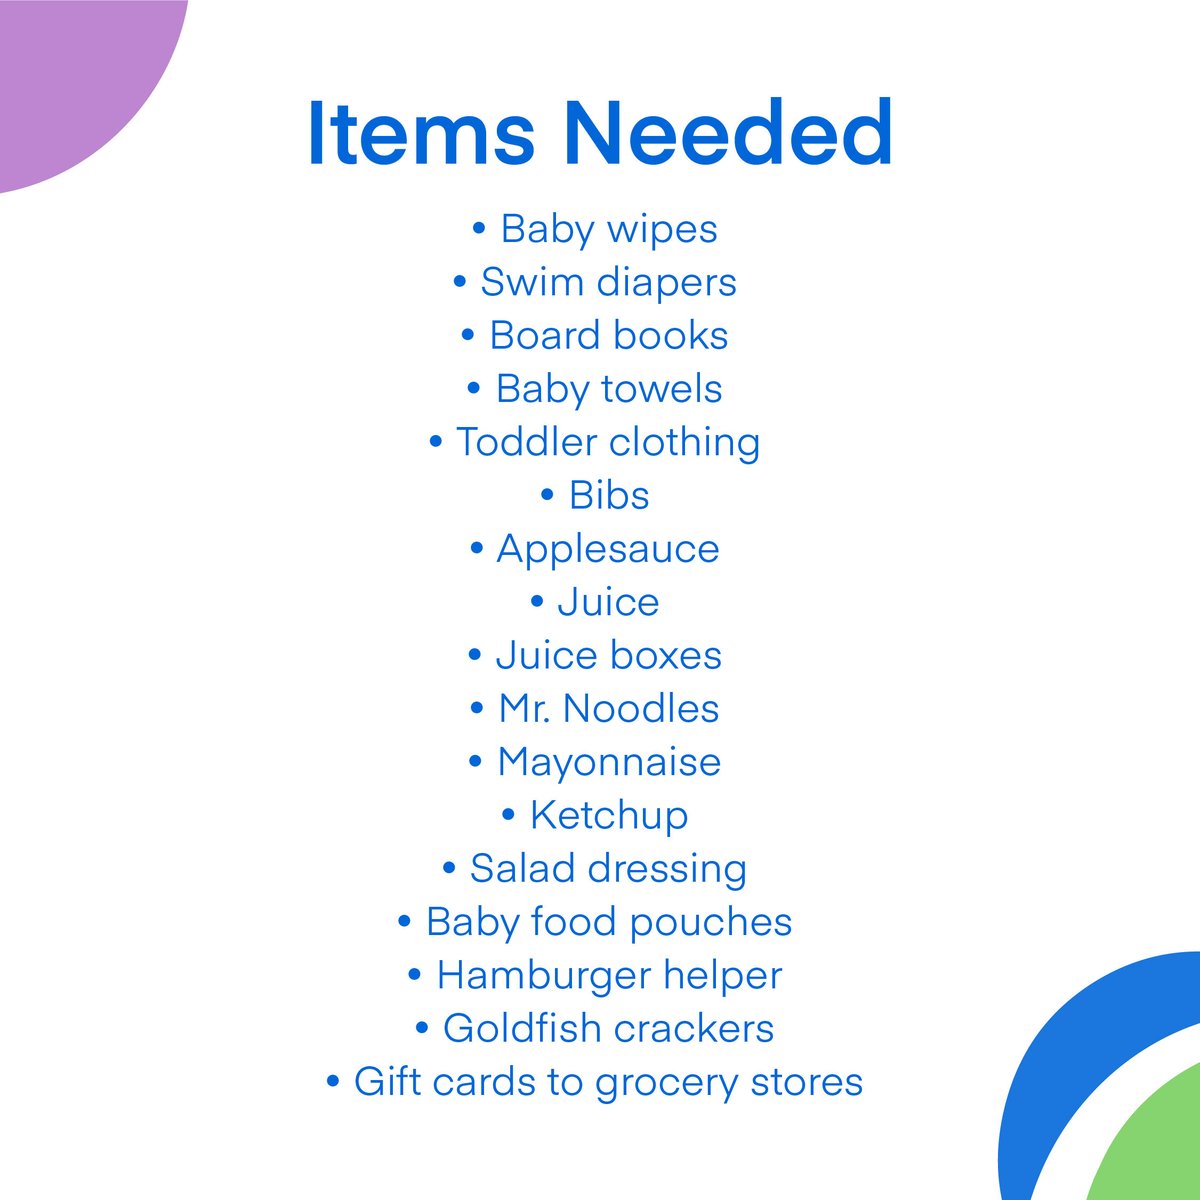 [Follow @CaminoWellbeing for new updates] Sometimes the people in our programs are in need of items that they can immediately benefit from. Please drop off any items to 400 Queen St. S., Kitchener. Thank you for making a difference today! caminowellbeing.ca/donate-items